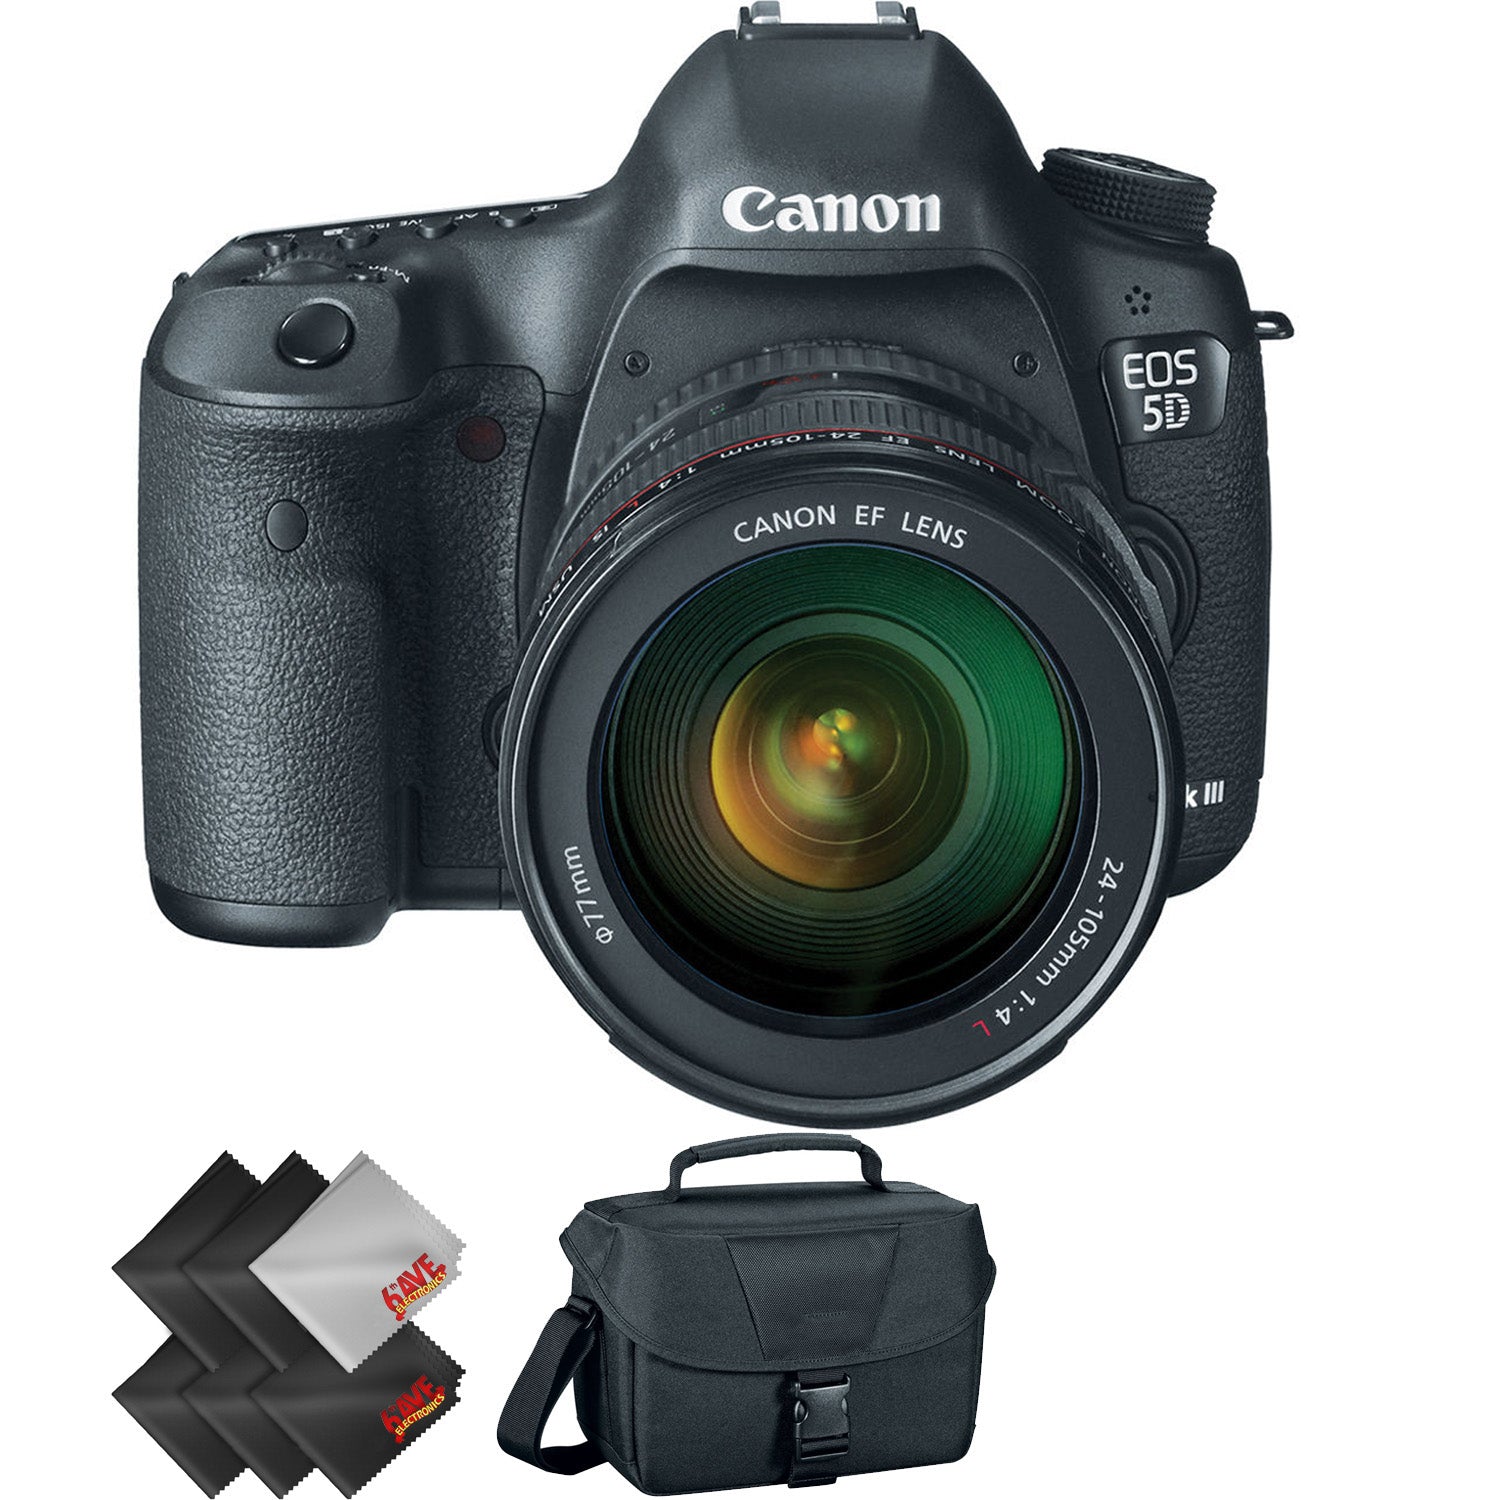 Canon EOS 5D Mark III DSLR Camera with 24-105mm Lens + 2 Year Accidental Warranty Bundle